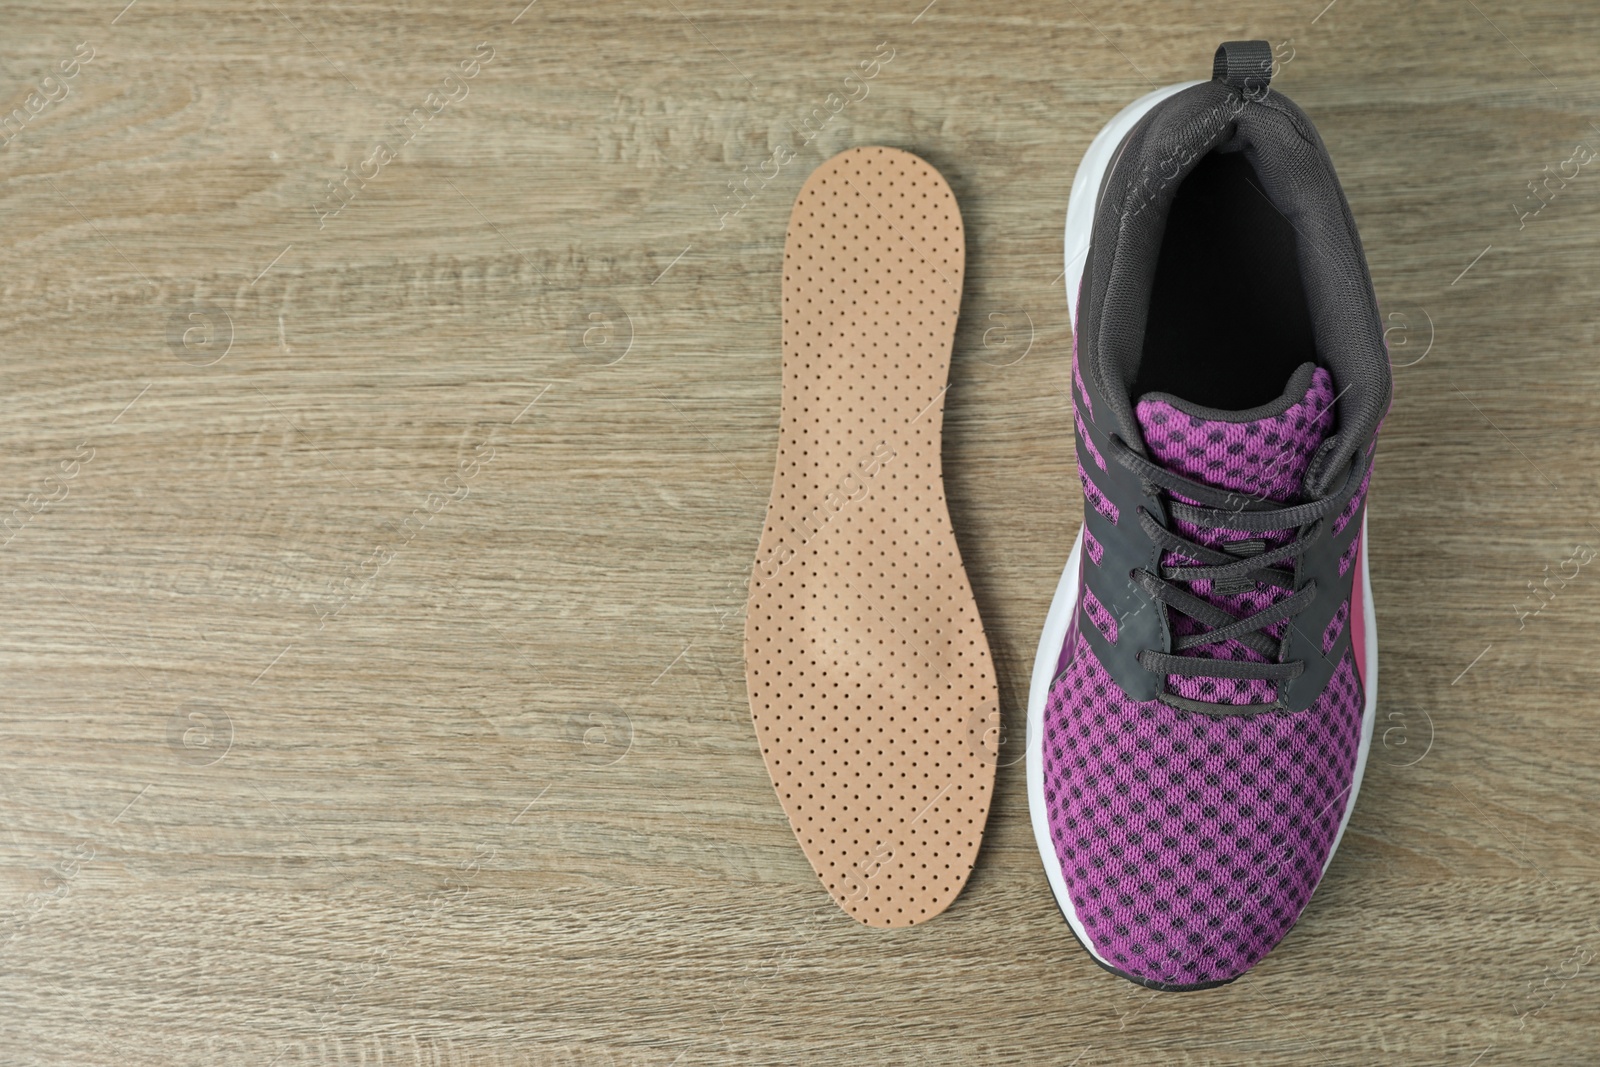 Photo of Orthopedic insole near shoe on floor, flat lay. Space for text